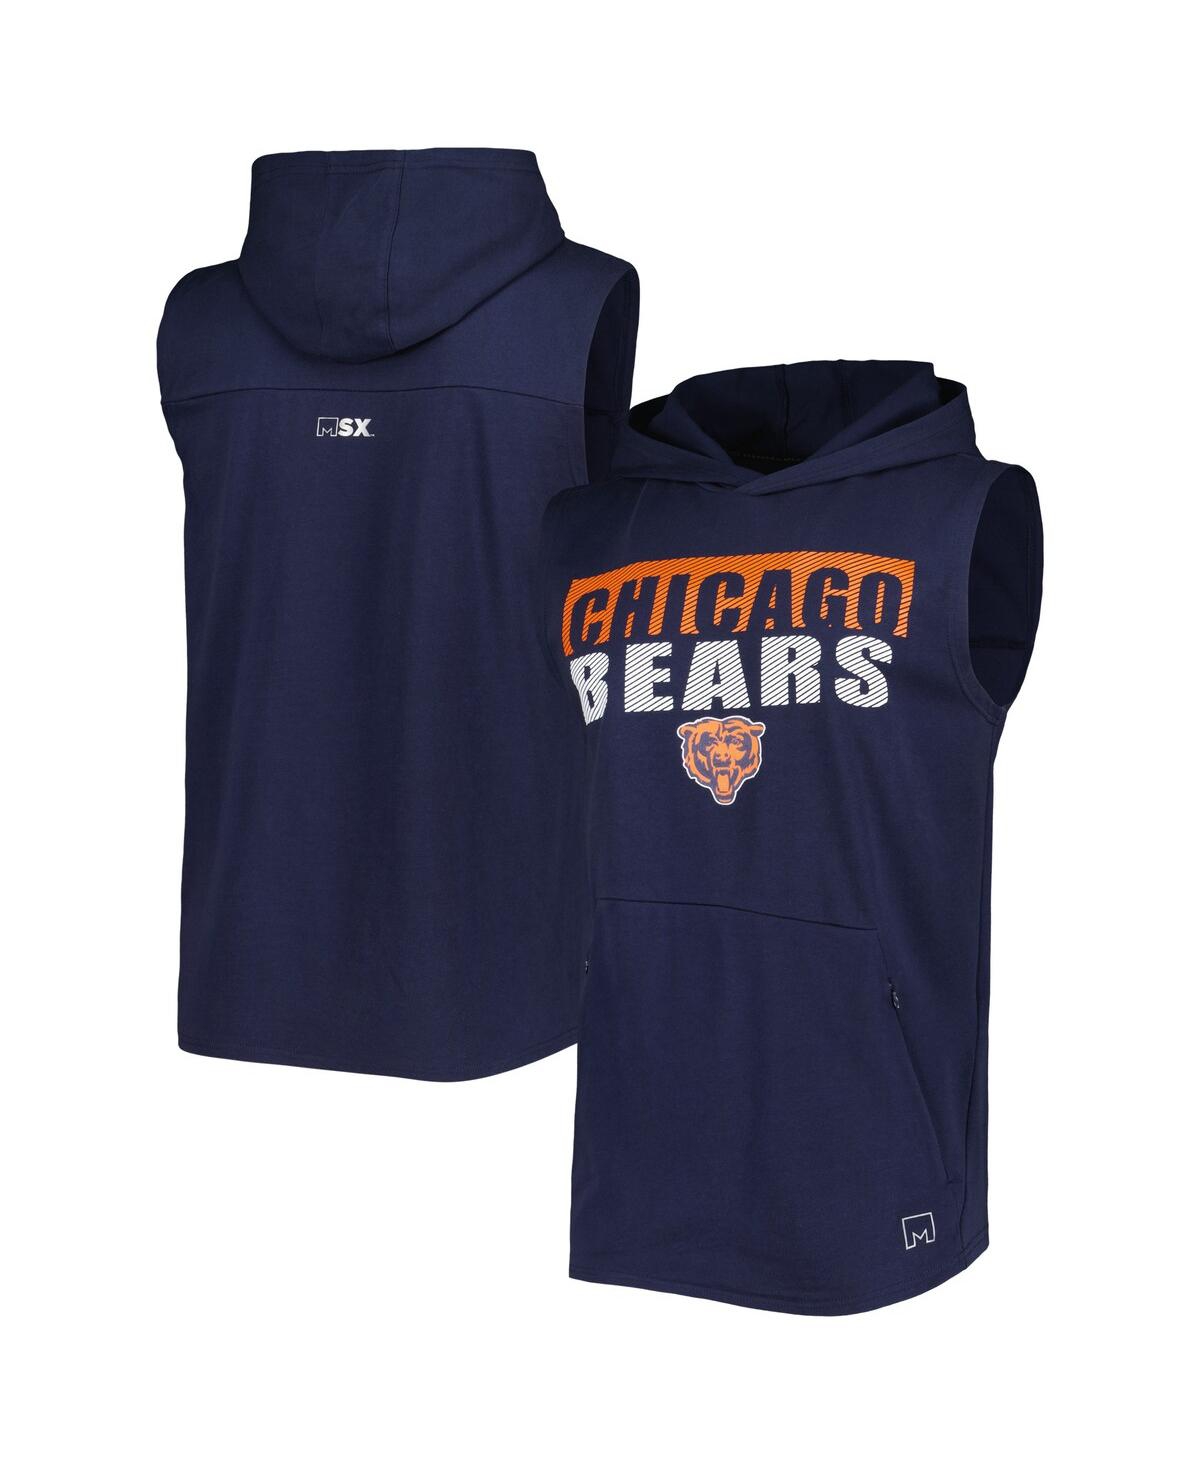 Msx By Michael Strahan Men's  Navy Chicago Bears Relay Sleeveless Pullover Hoodie